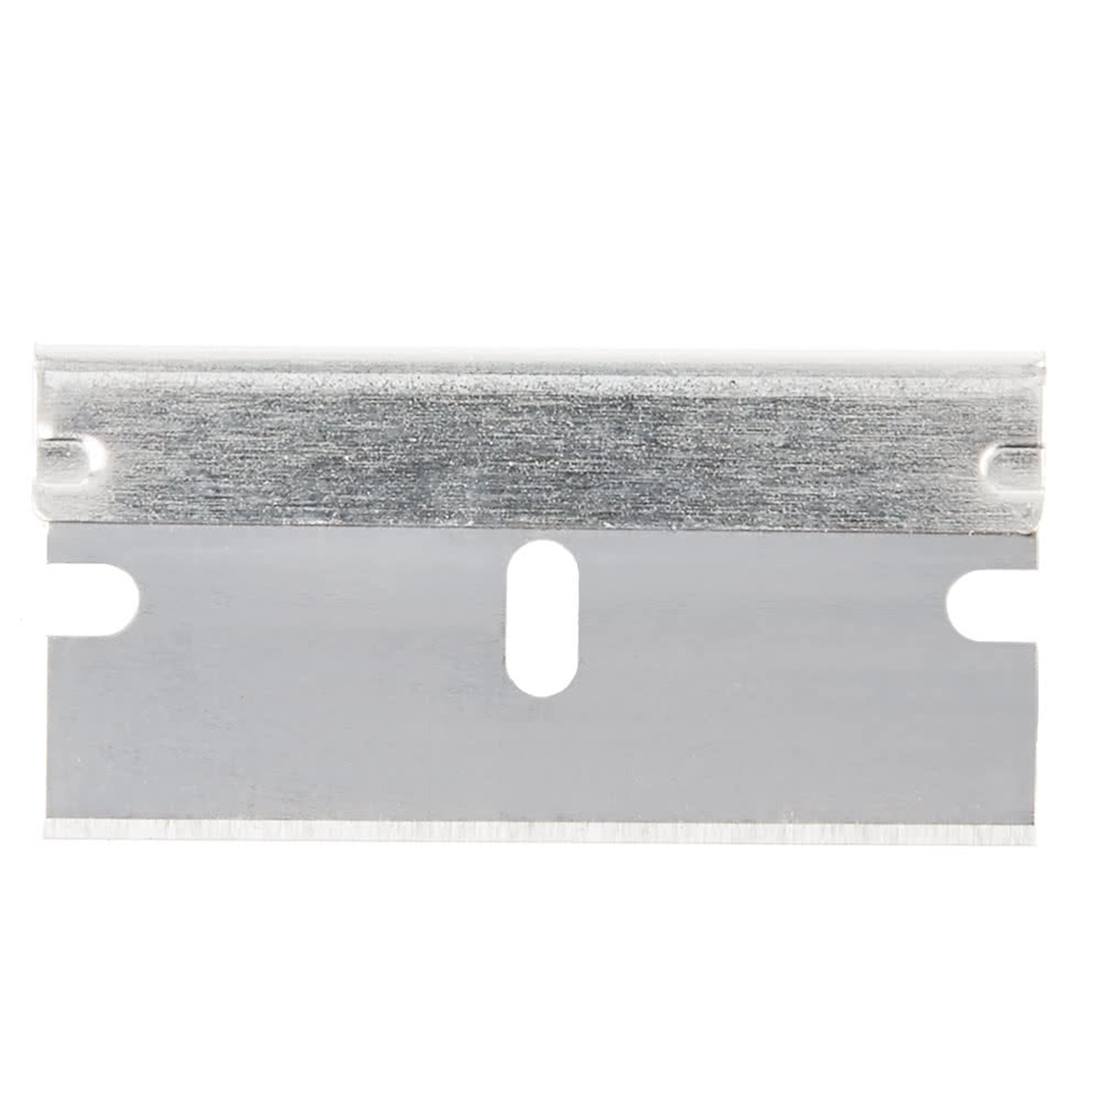 Sörbo Razor Blades - Pack of Ten - Single Front View